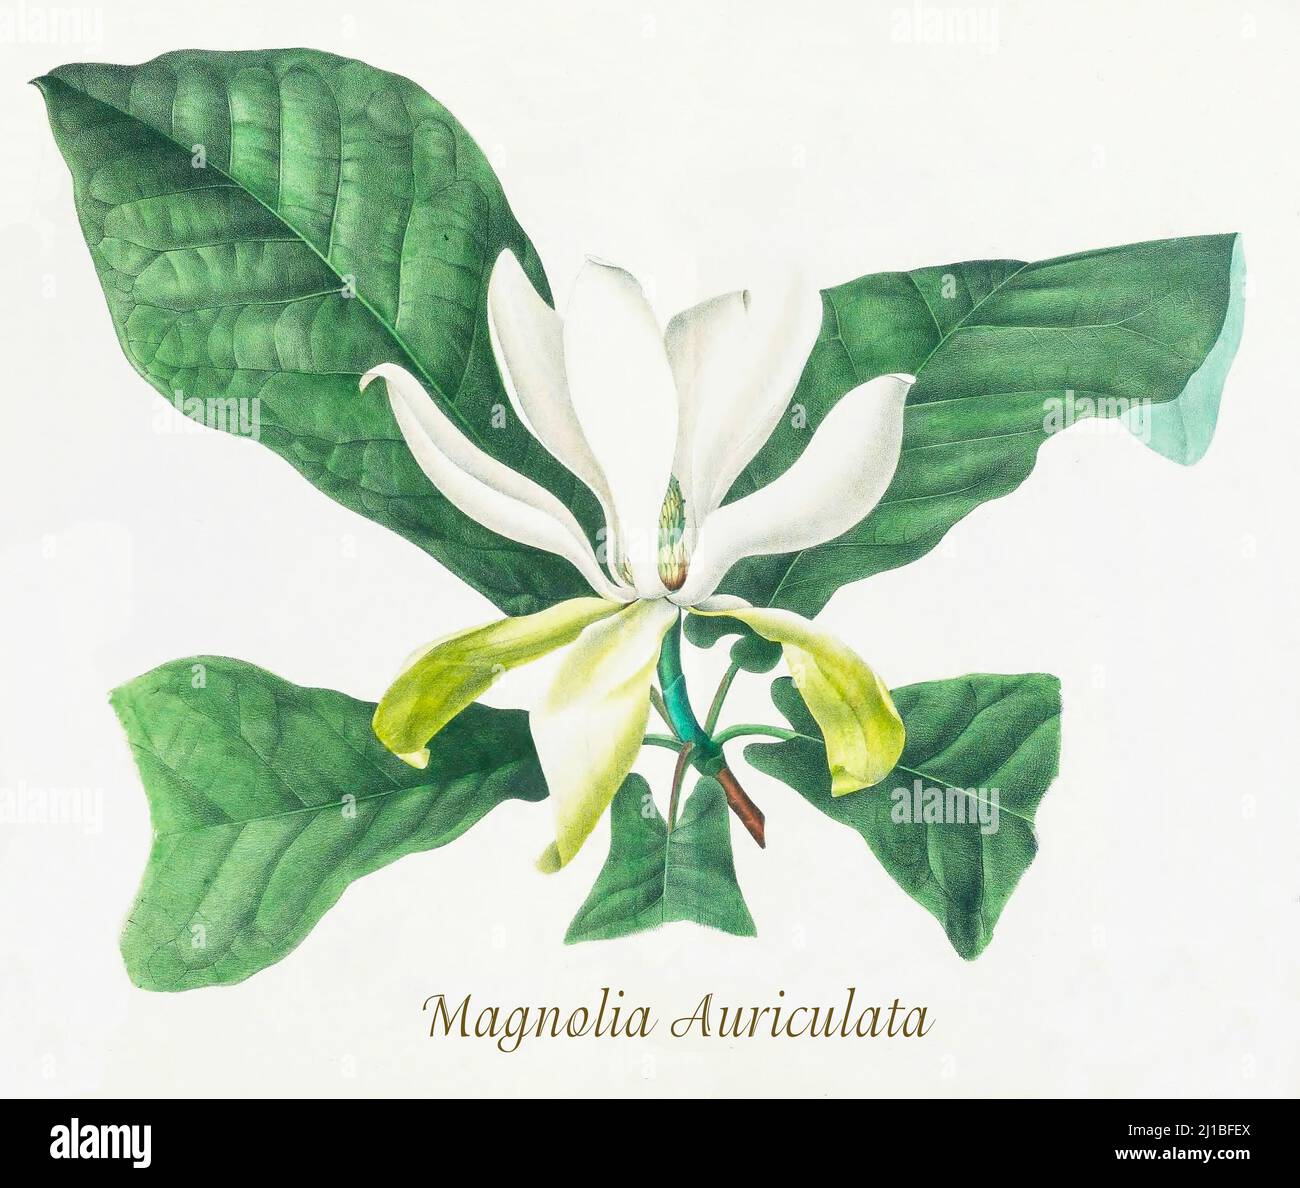 A late 19th century illustration of Magnolia auriculata, commonly known as Pyramid or Mountain magnolia, a tree of the family Magnoliaceae native to North America. The illustration by Asa Gray prepared between the years 1849 and 1859, to accompany a report on the forest trees of North America, Washington. Stock Photo